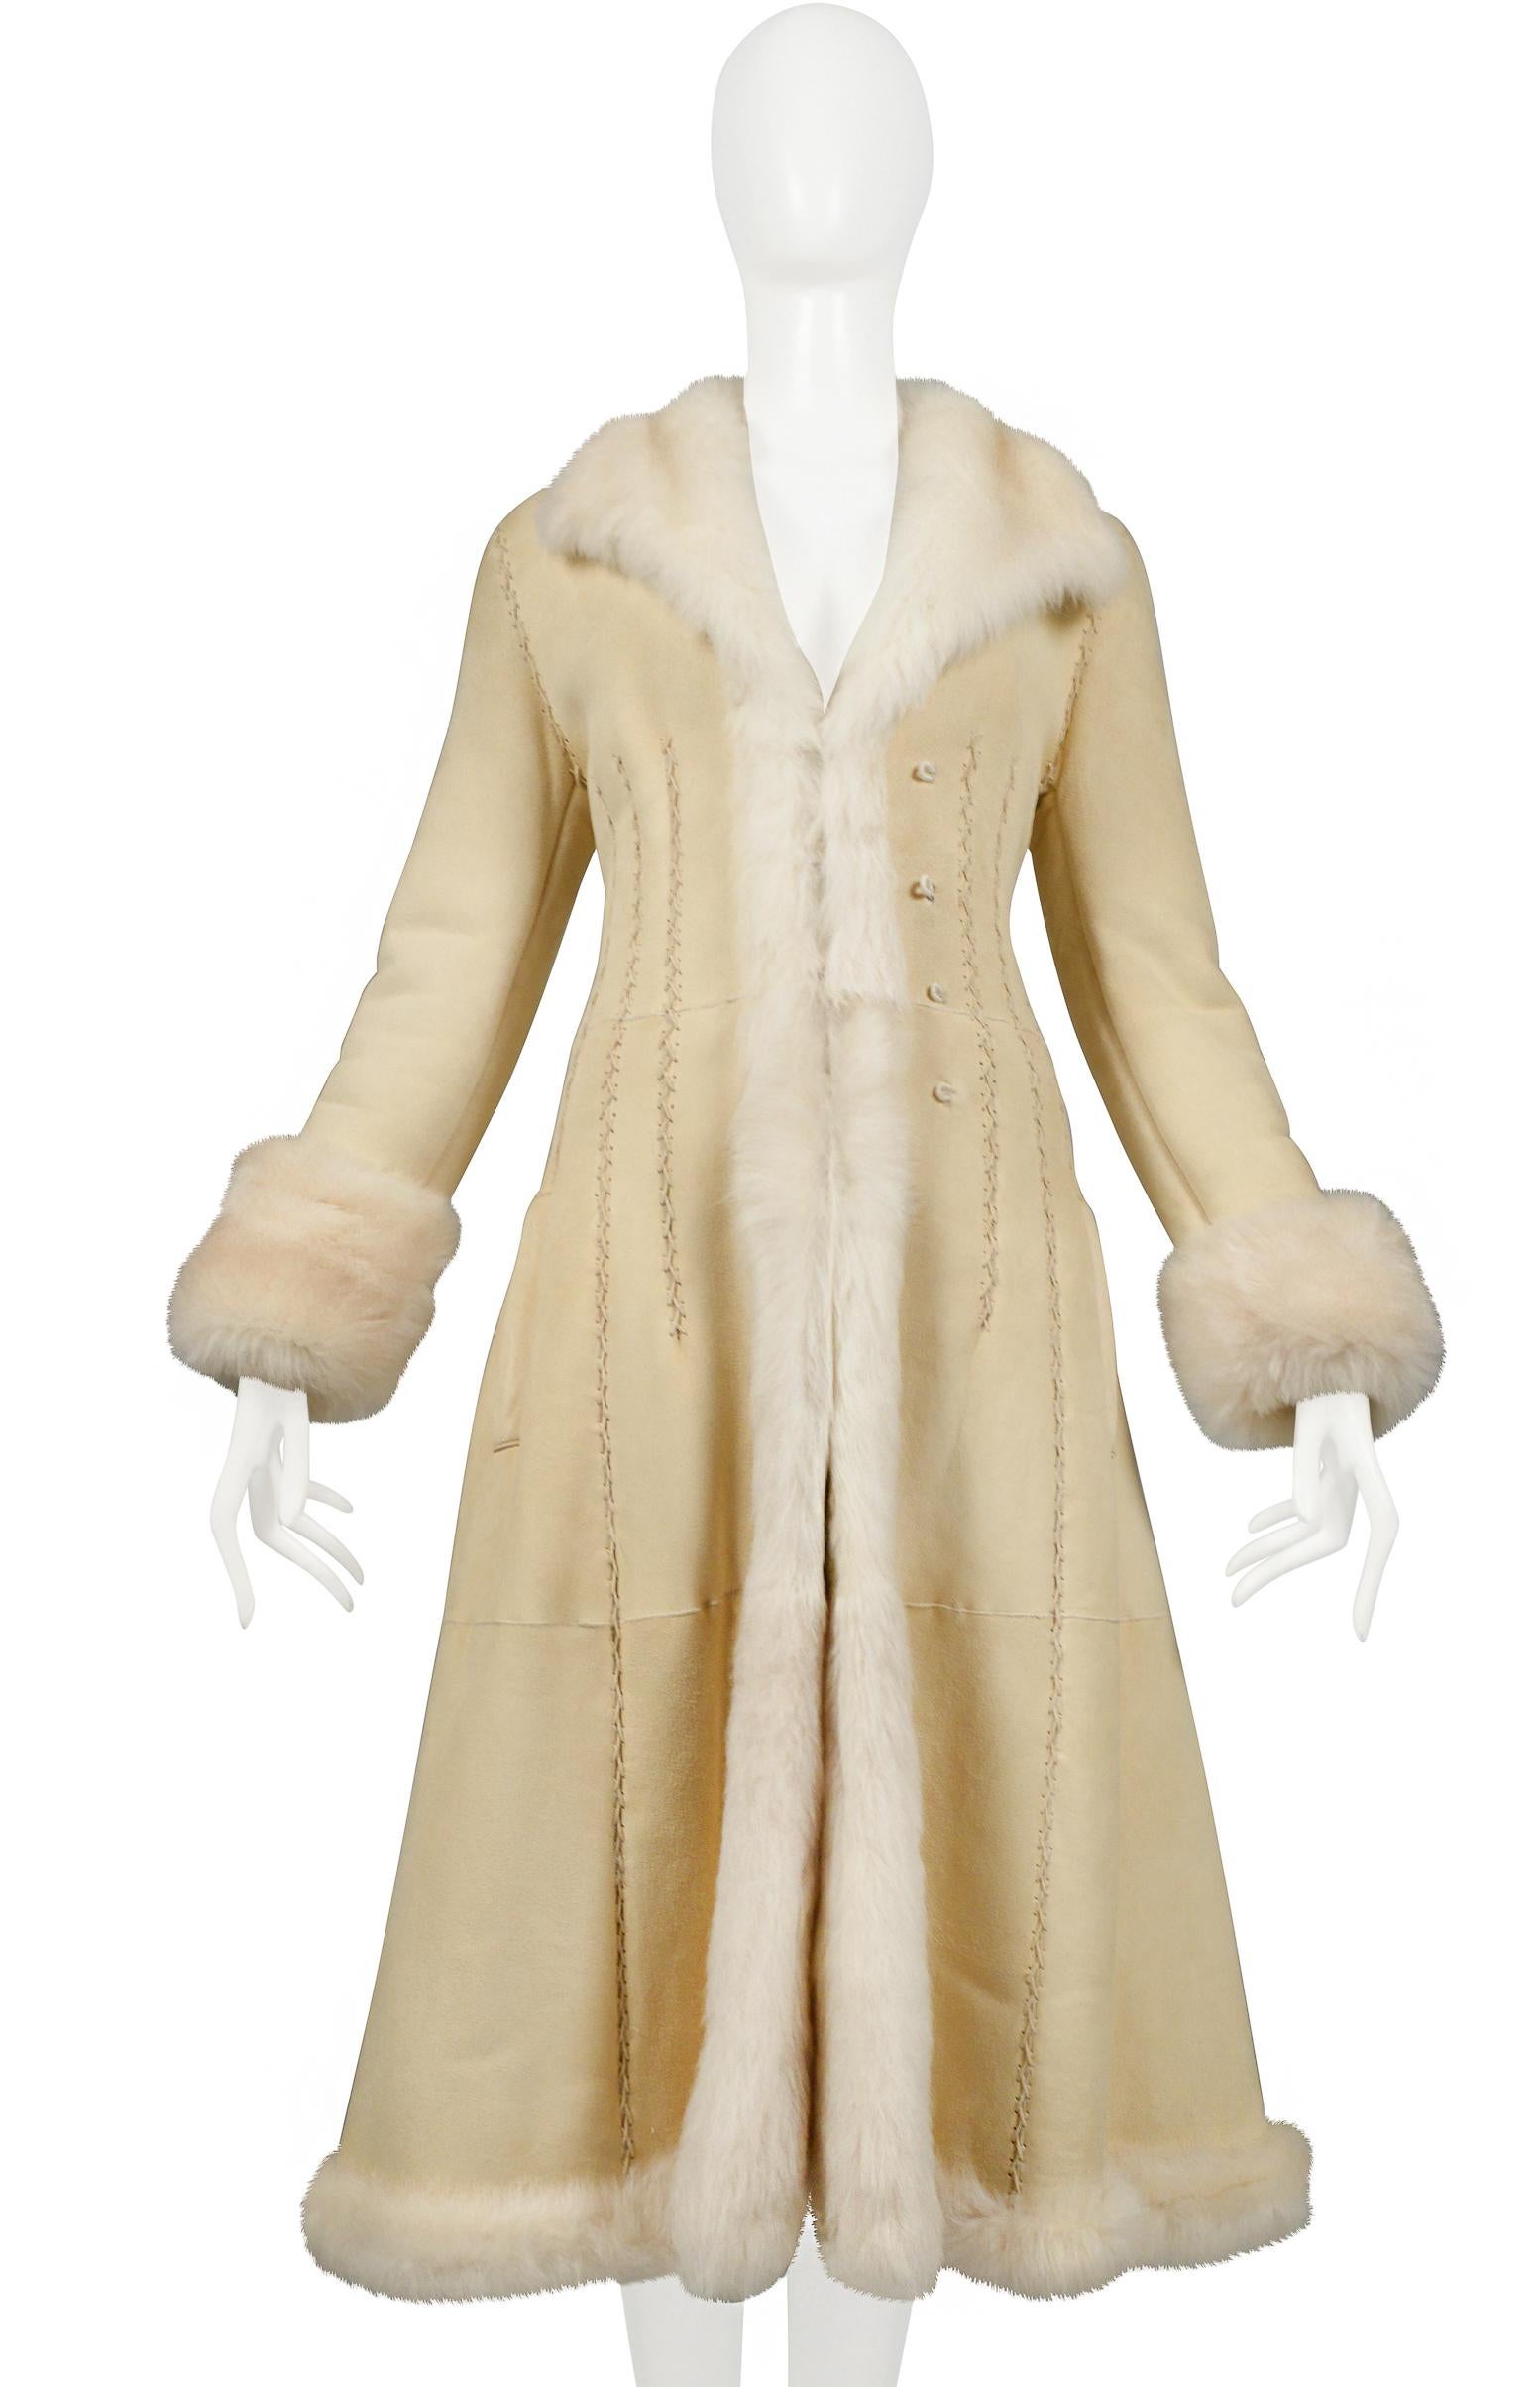 Women's Iconic Alexander Mcqueen Off-White Suede Coat With Luxe Shearling Interior